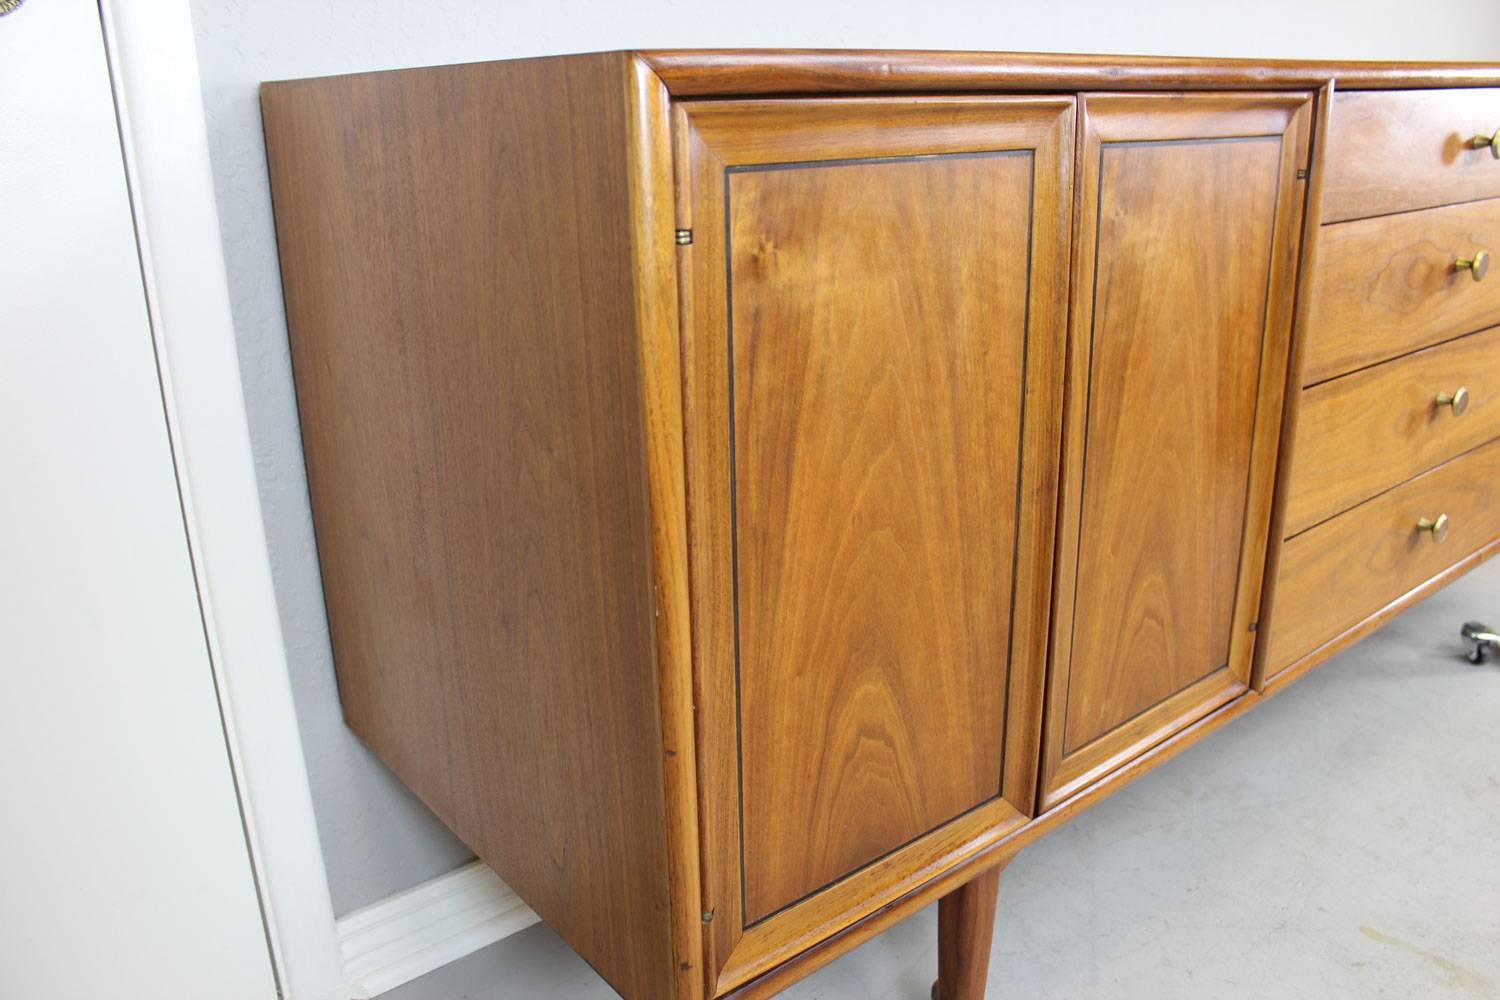 American Mid-Century Modern Drexel Credenza with Internal Lighted Cabinets